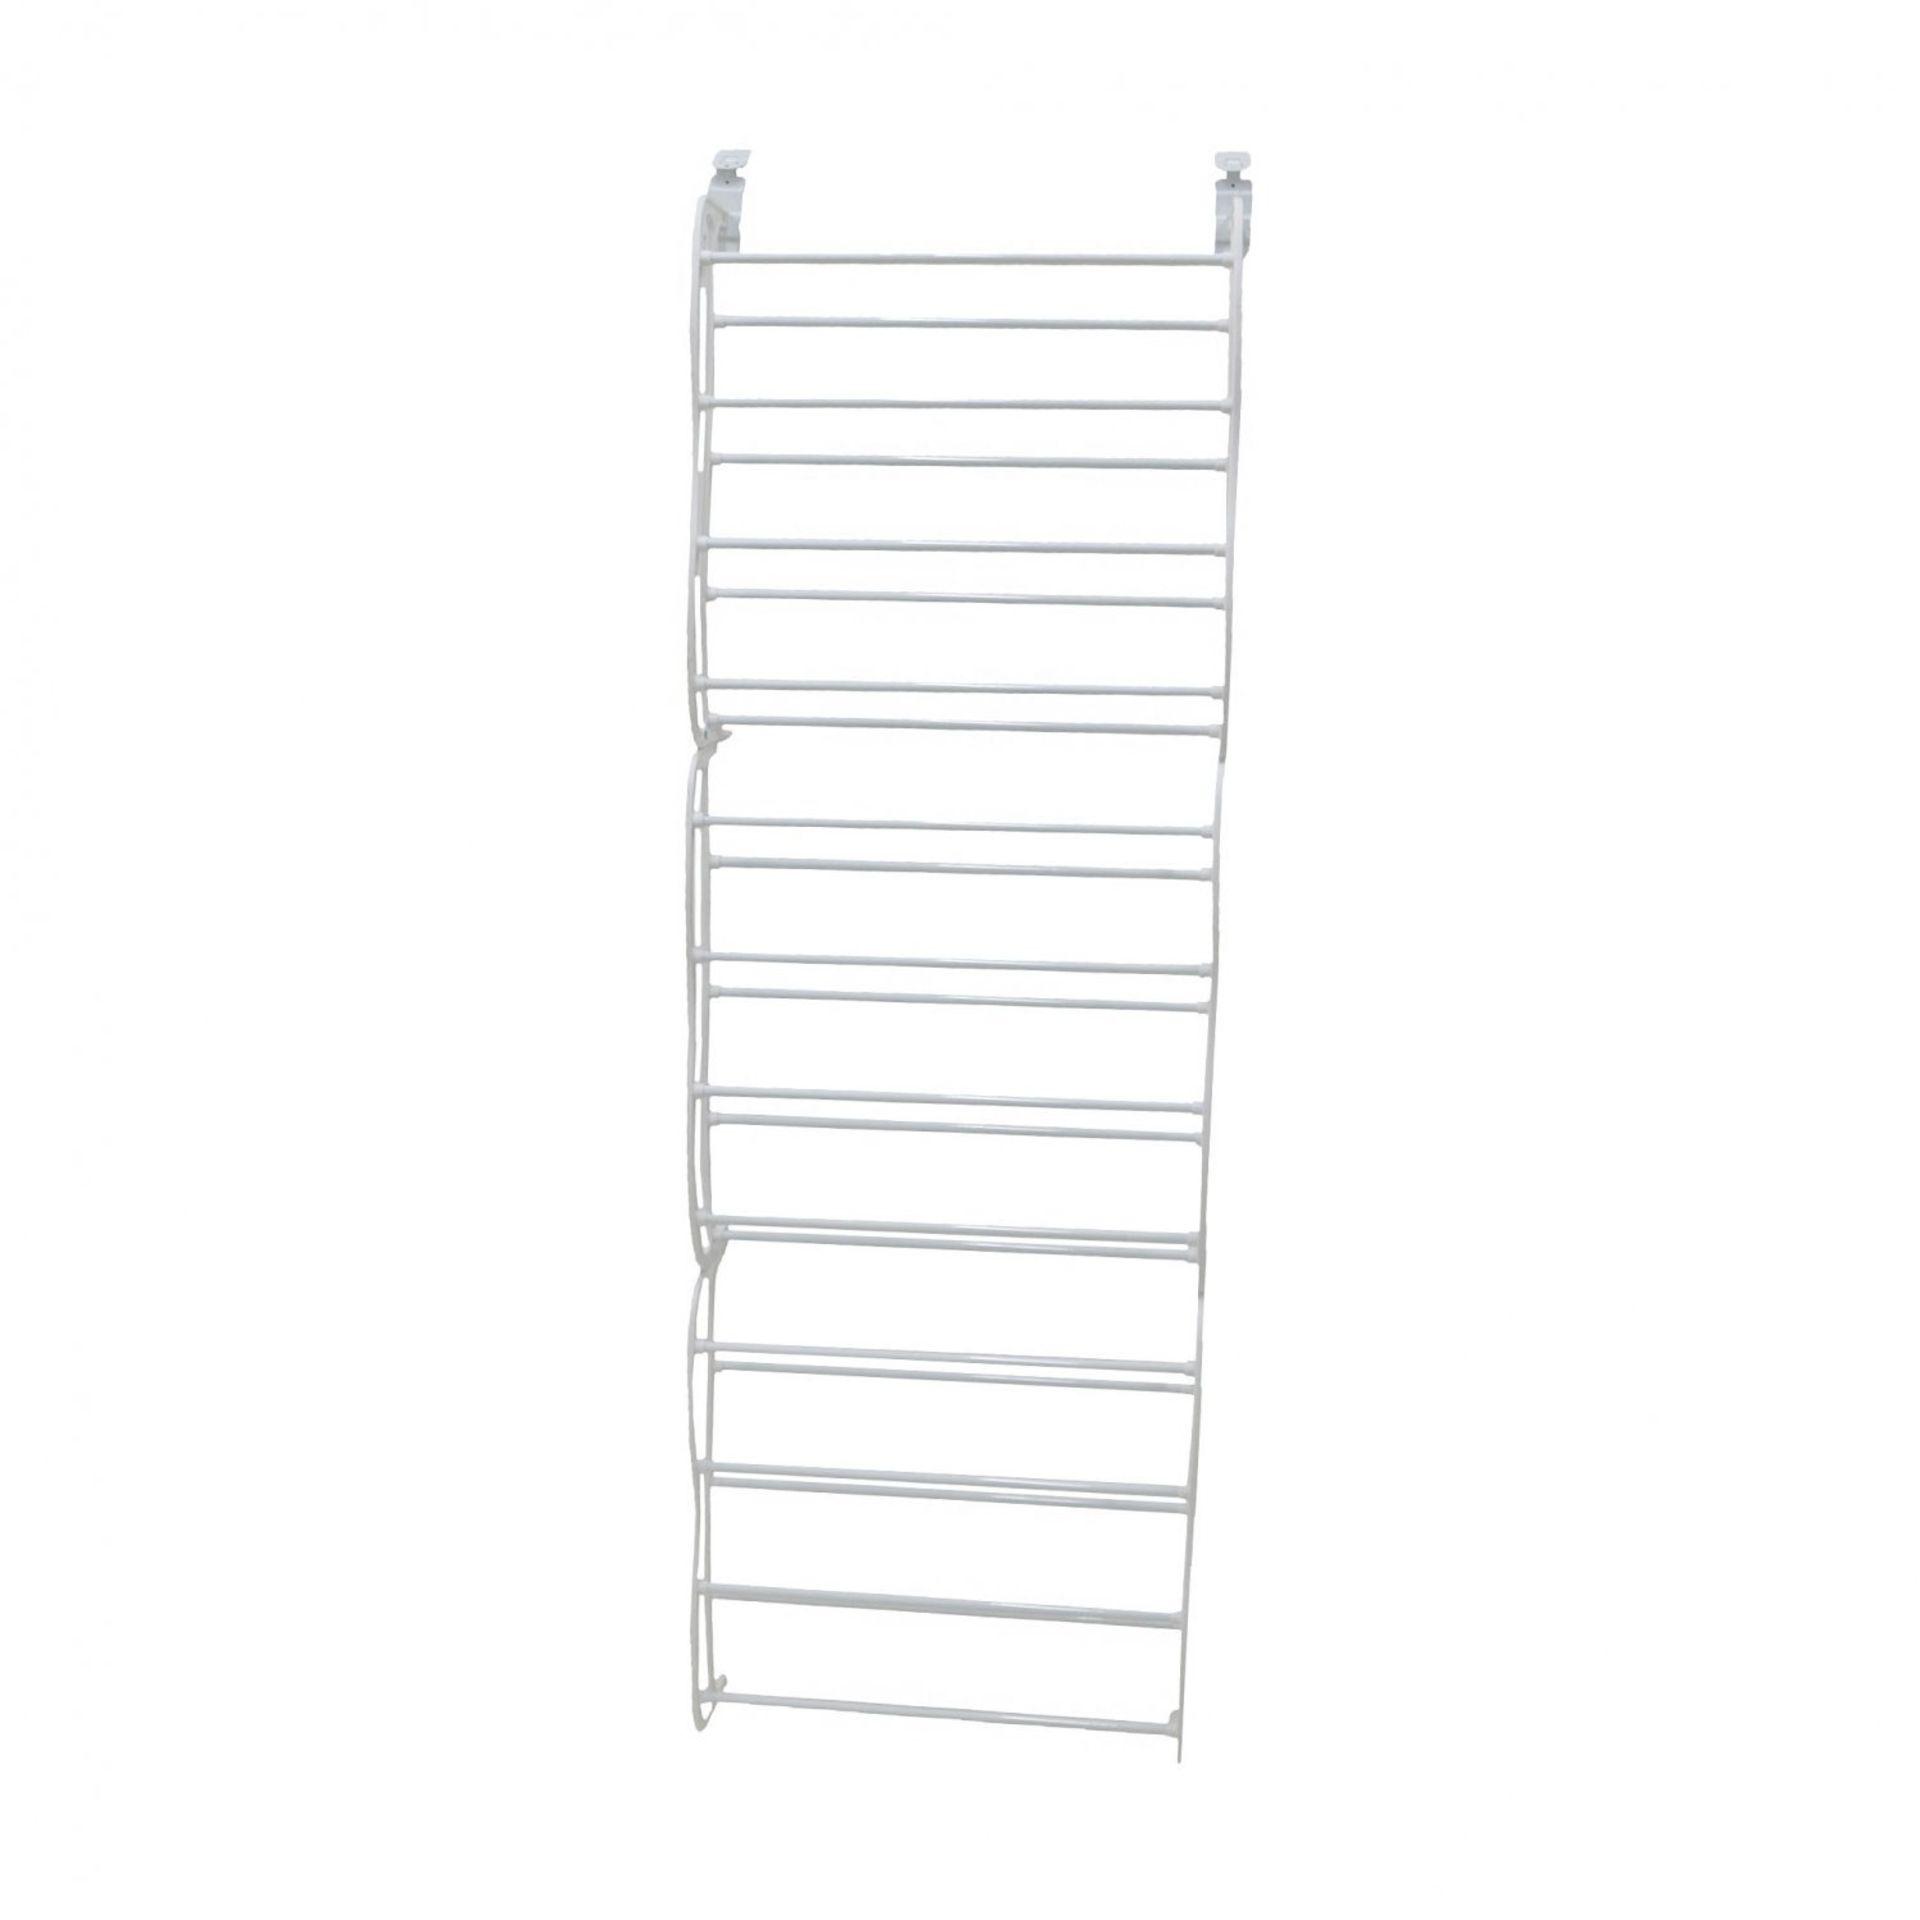 (F37) 12 Tier White Door Hanging Shoe Rack Organiser - Holds 72 Space Saving Design Holds Up... - Image 3 of 3